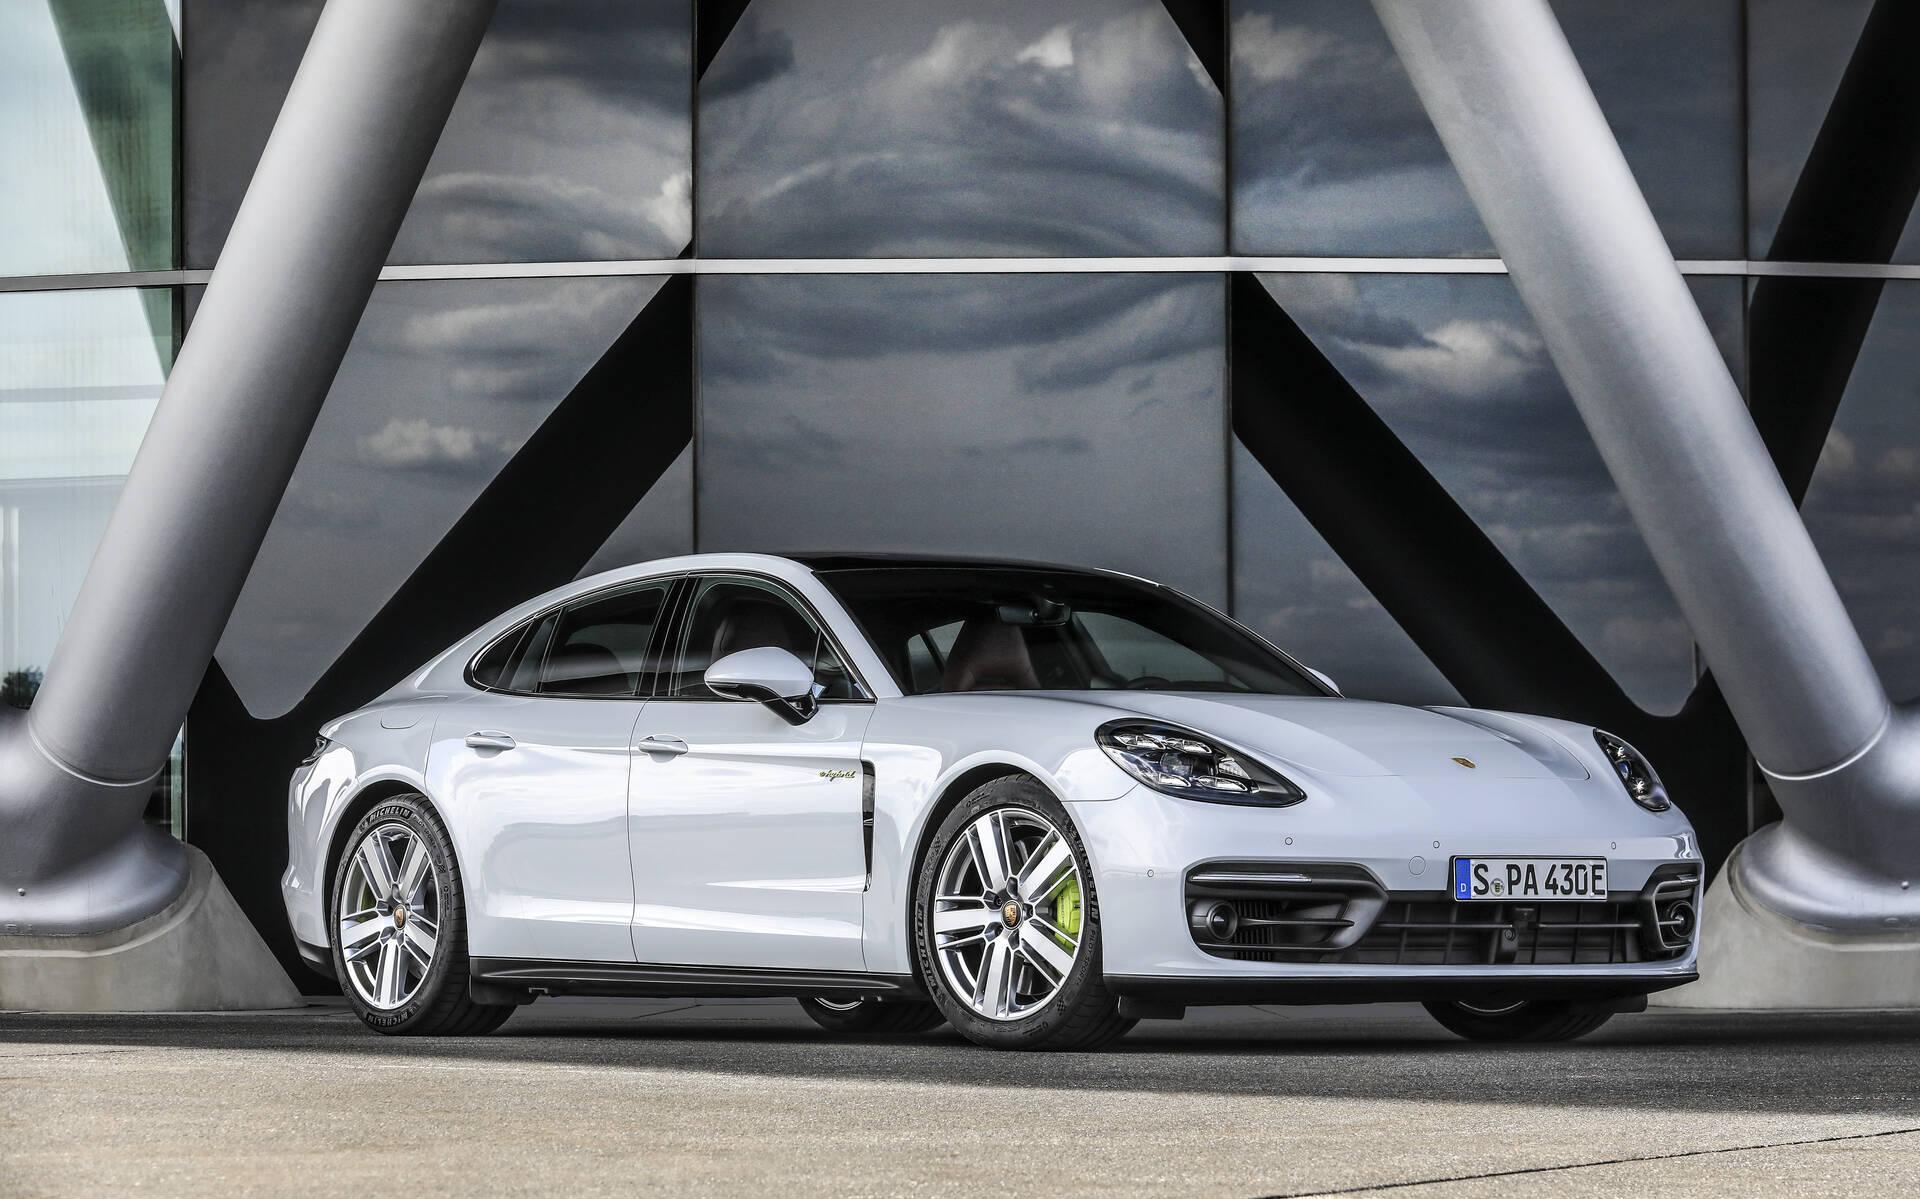 Porsche Panamera News Res Picture Galleries And